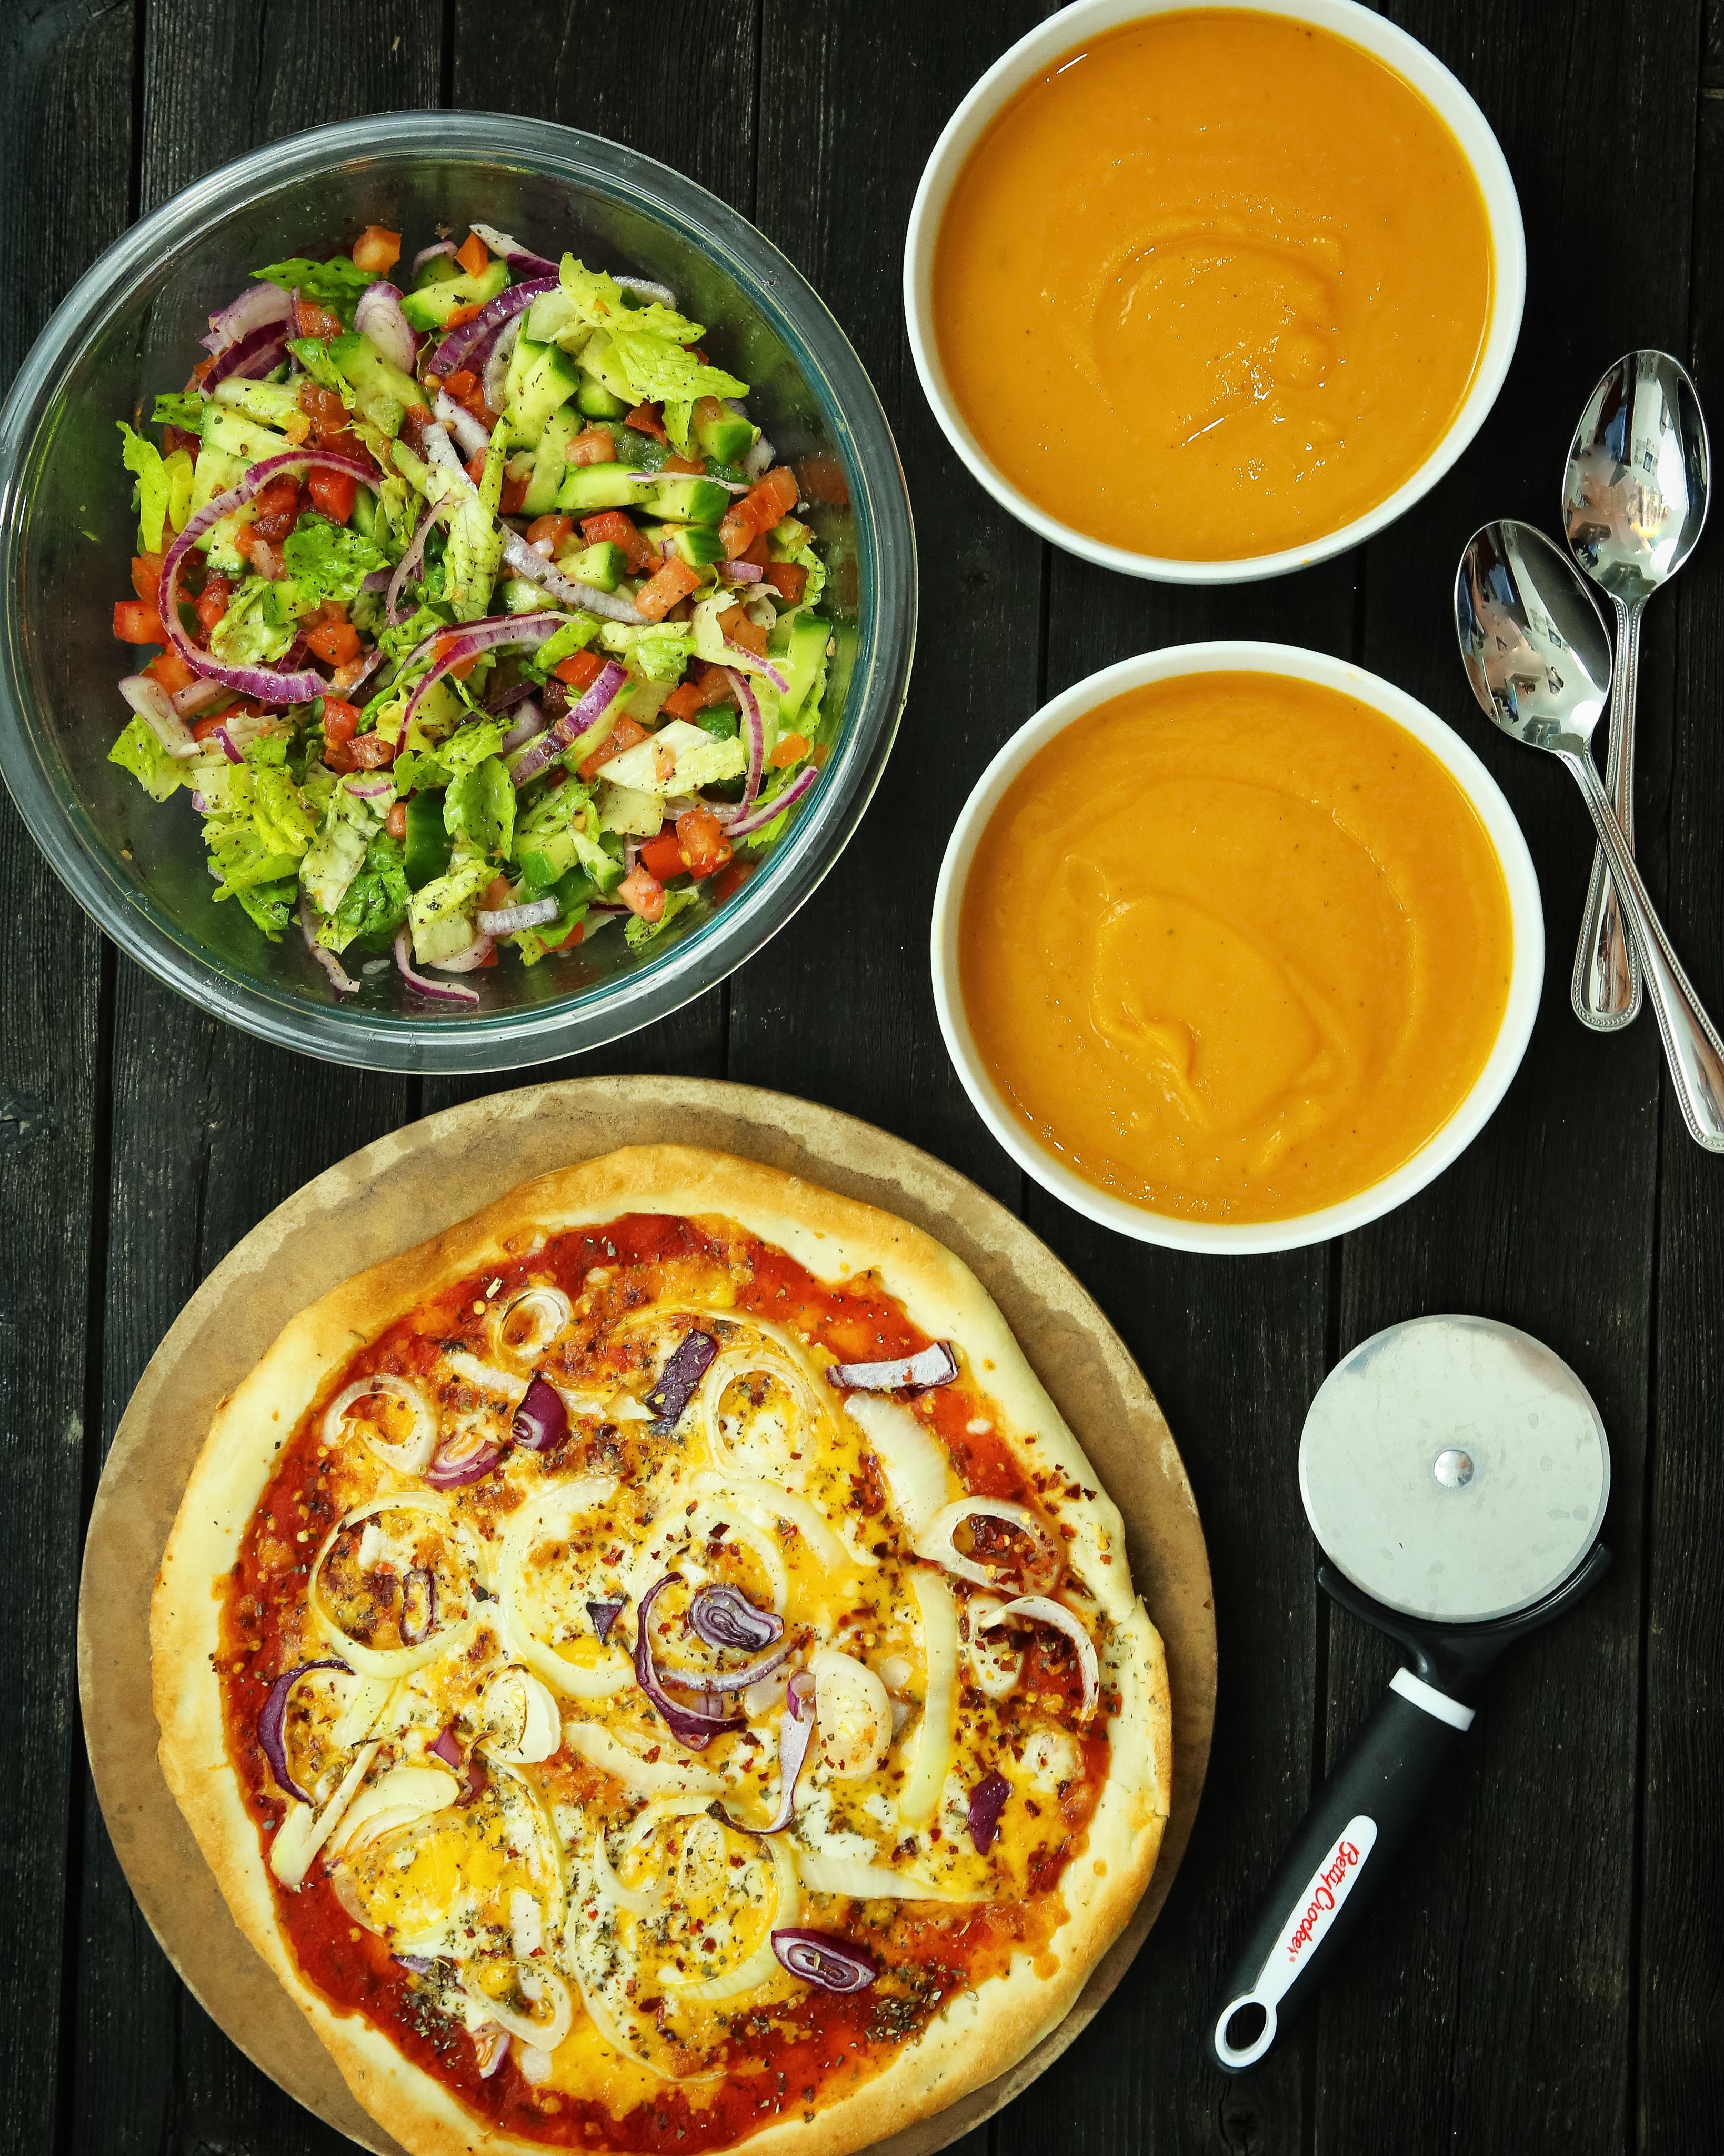 Soup, Salad and Pizza | Joodie the Foodie